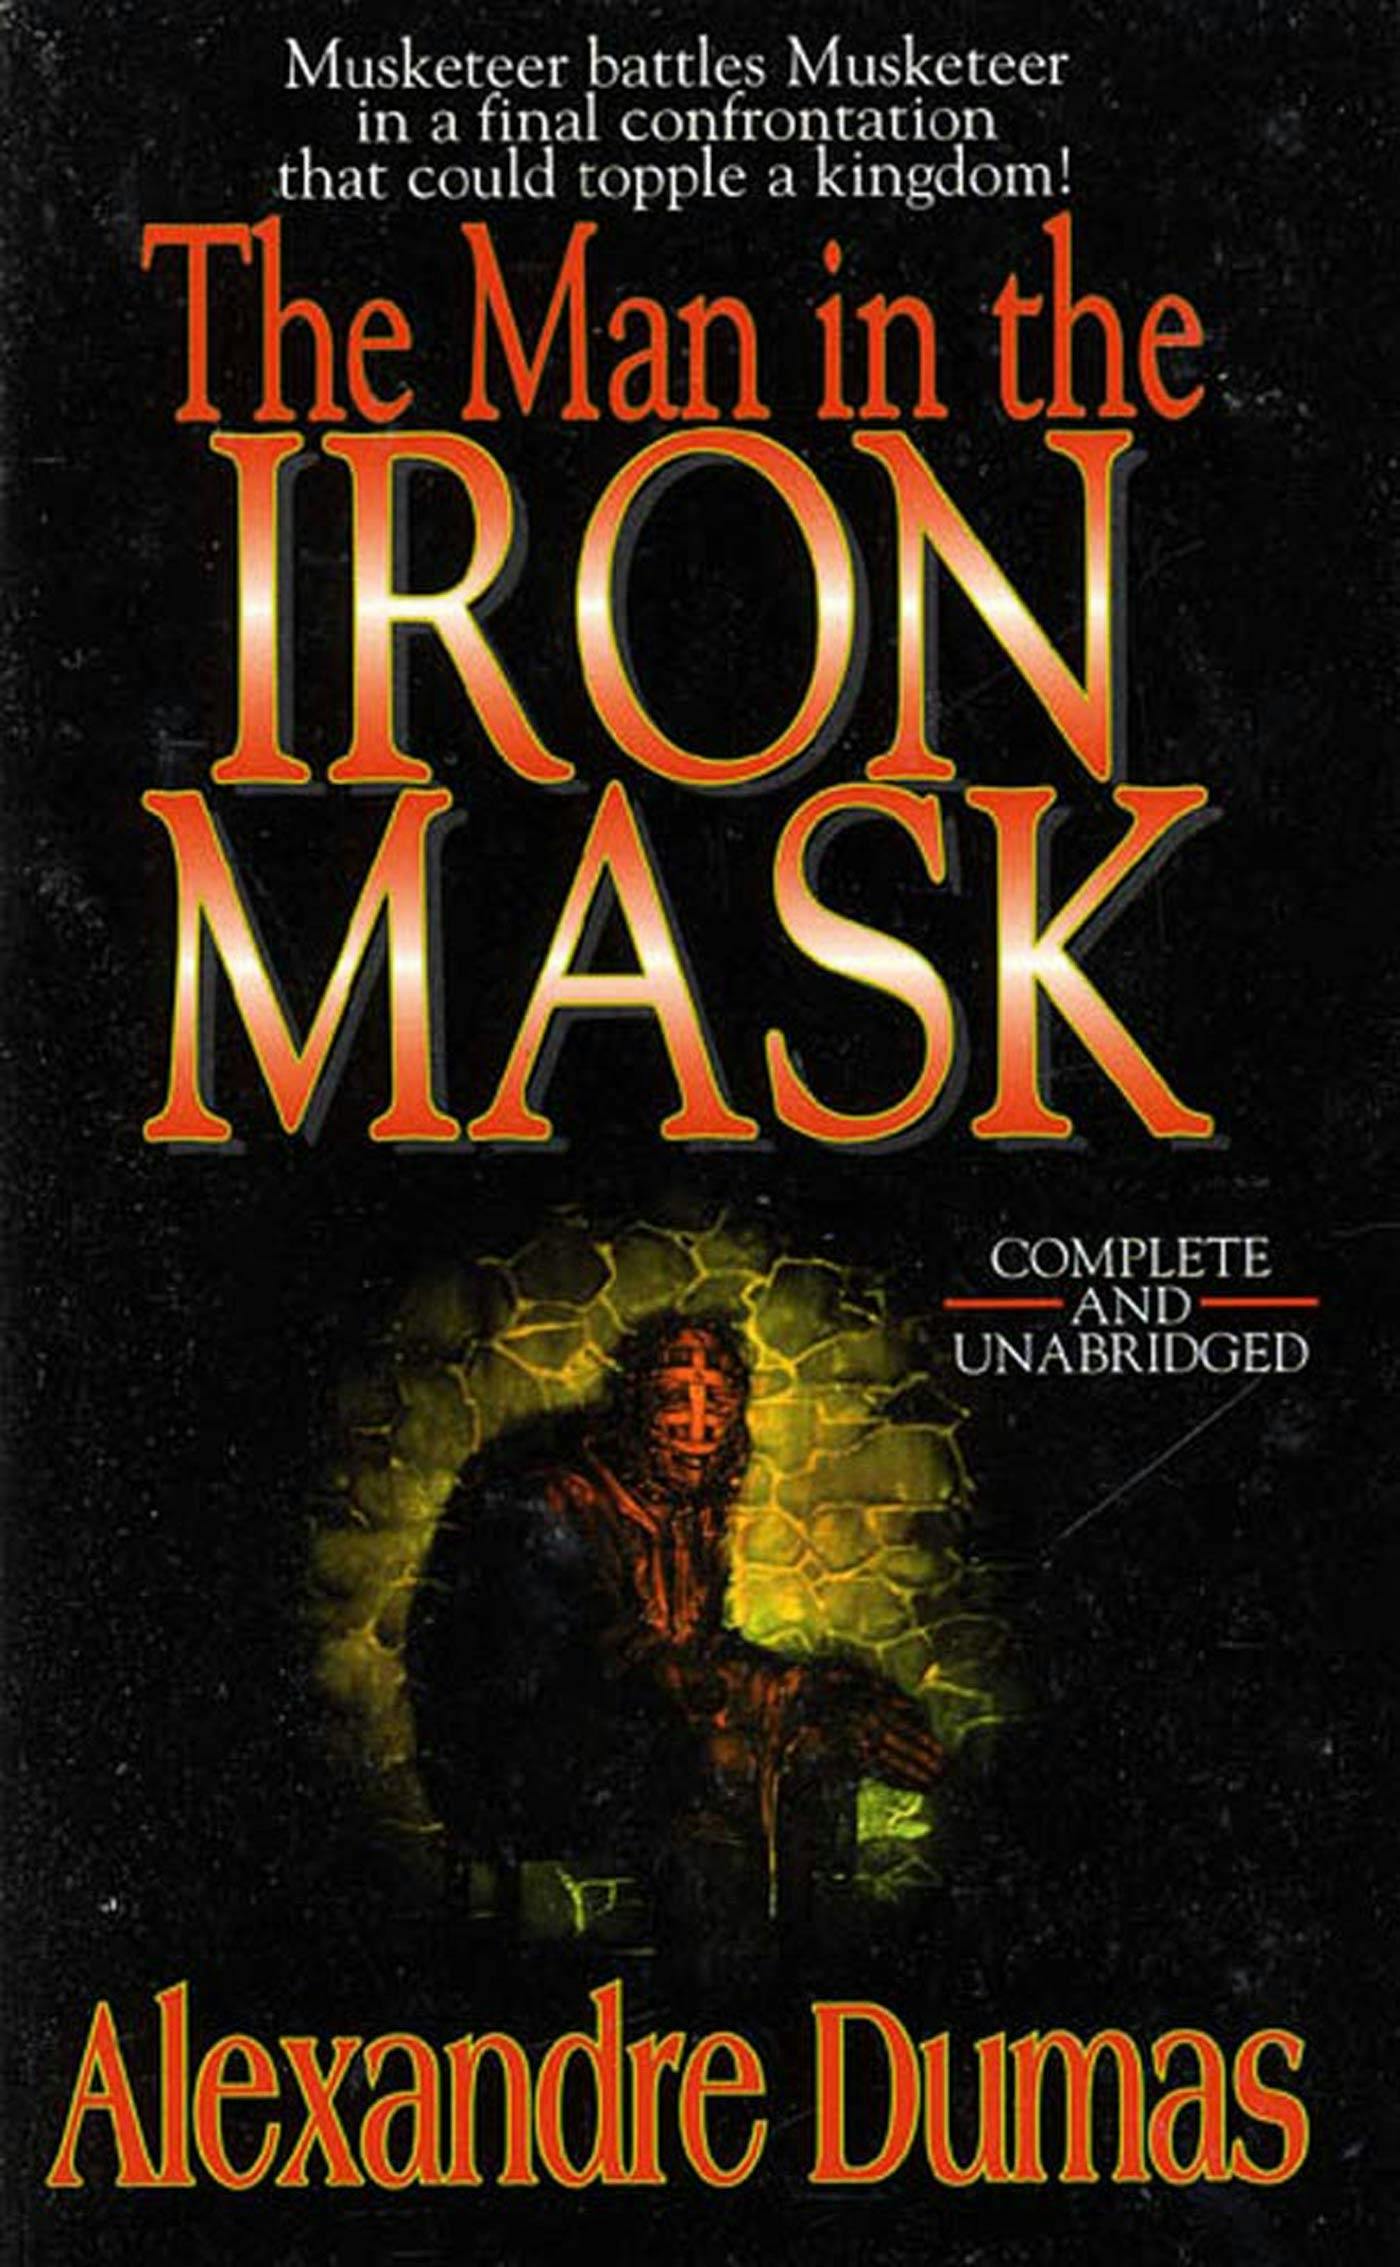 Image of The Man in the Iron Mask